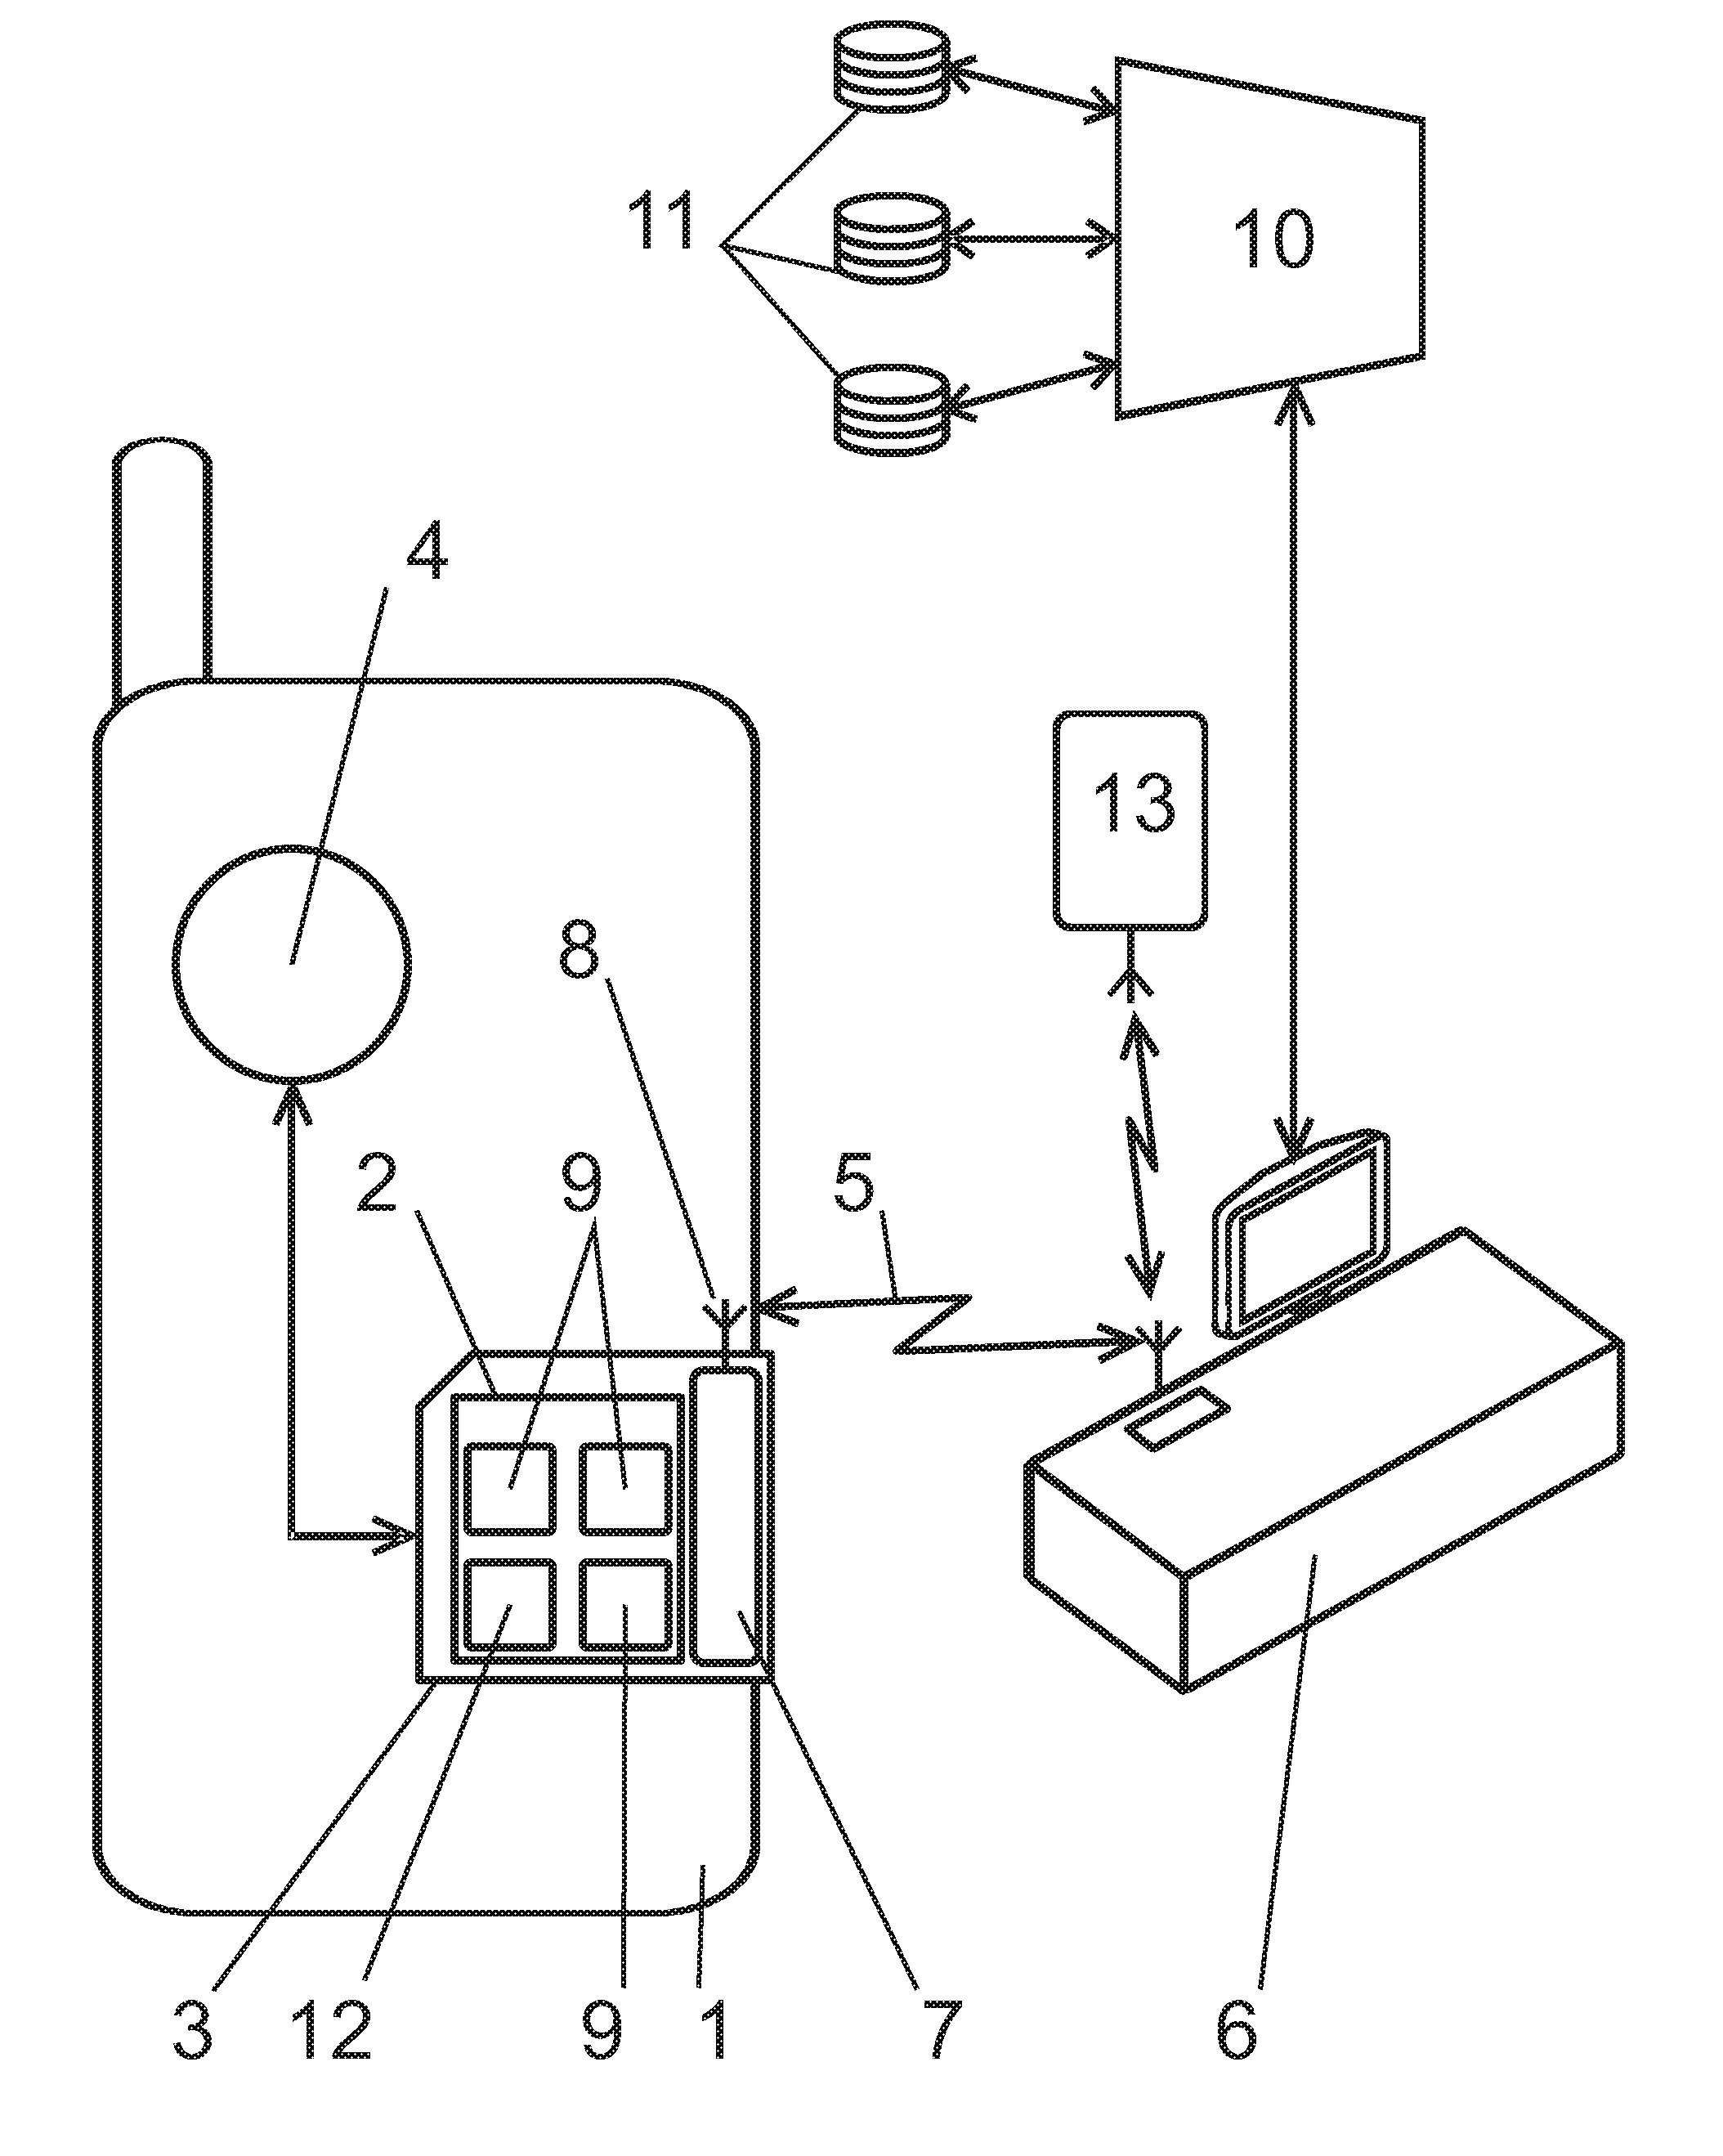 System and method of contactless authorization of a payment